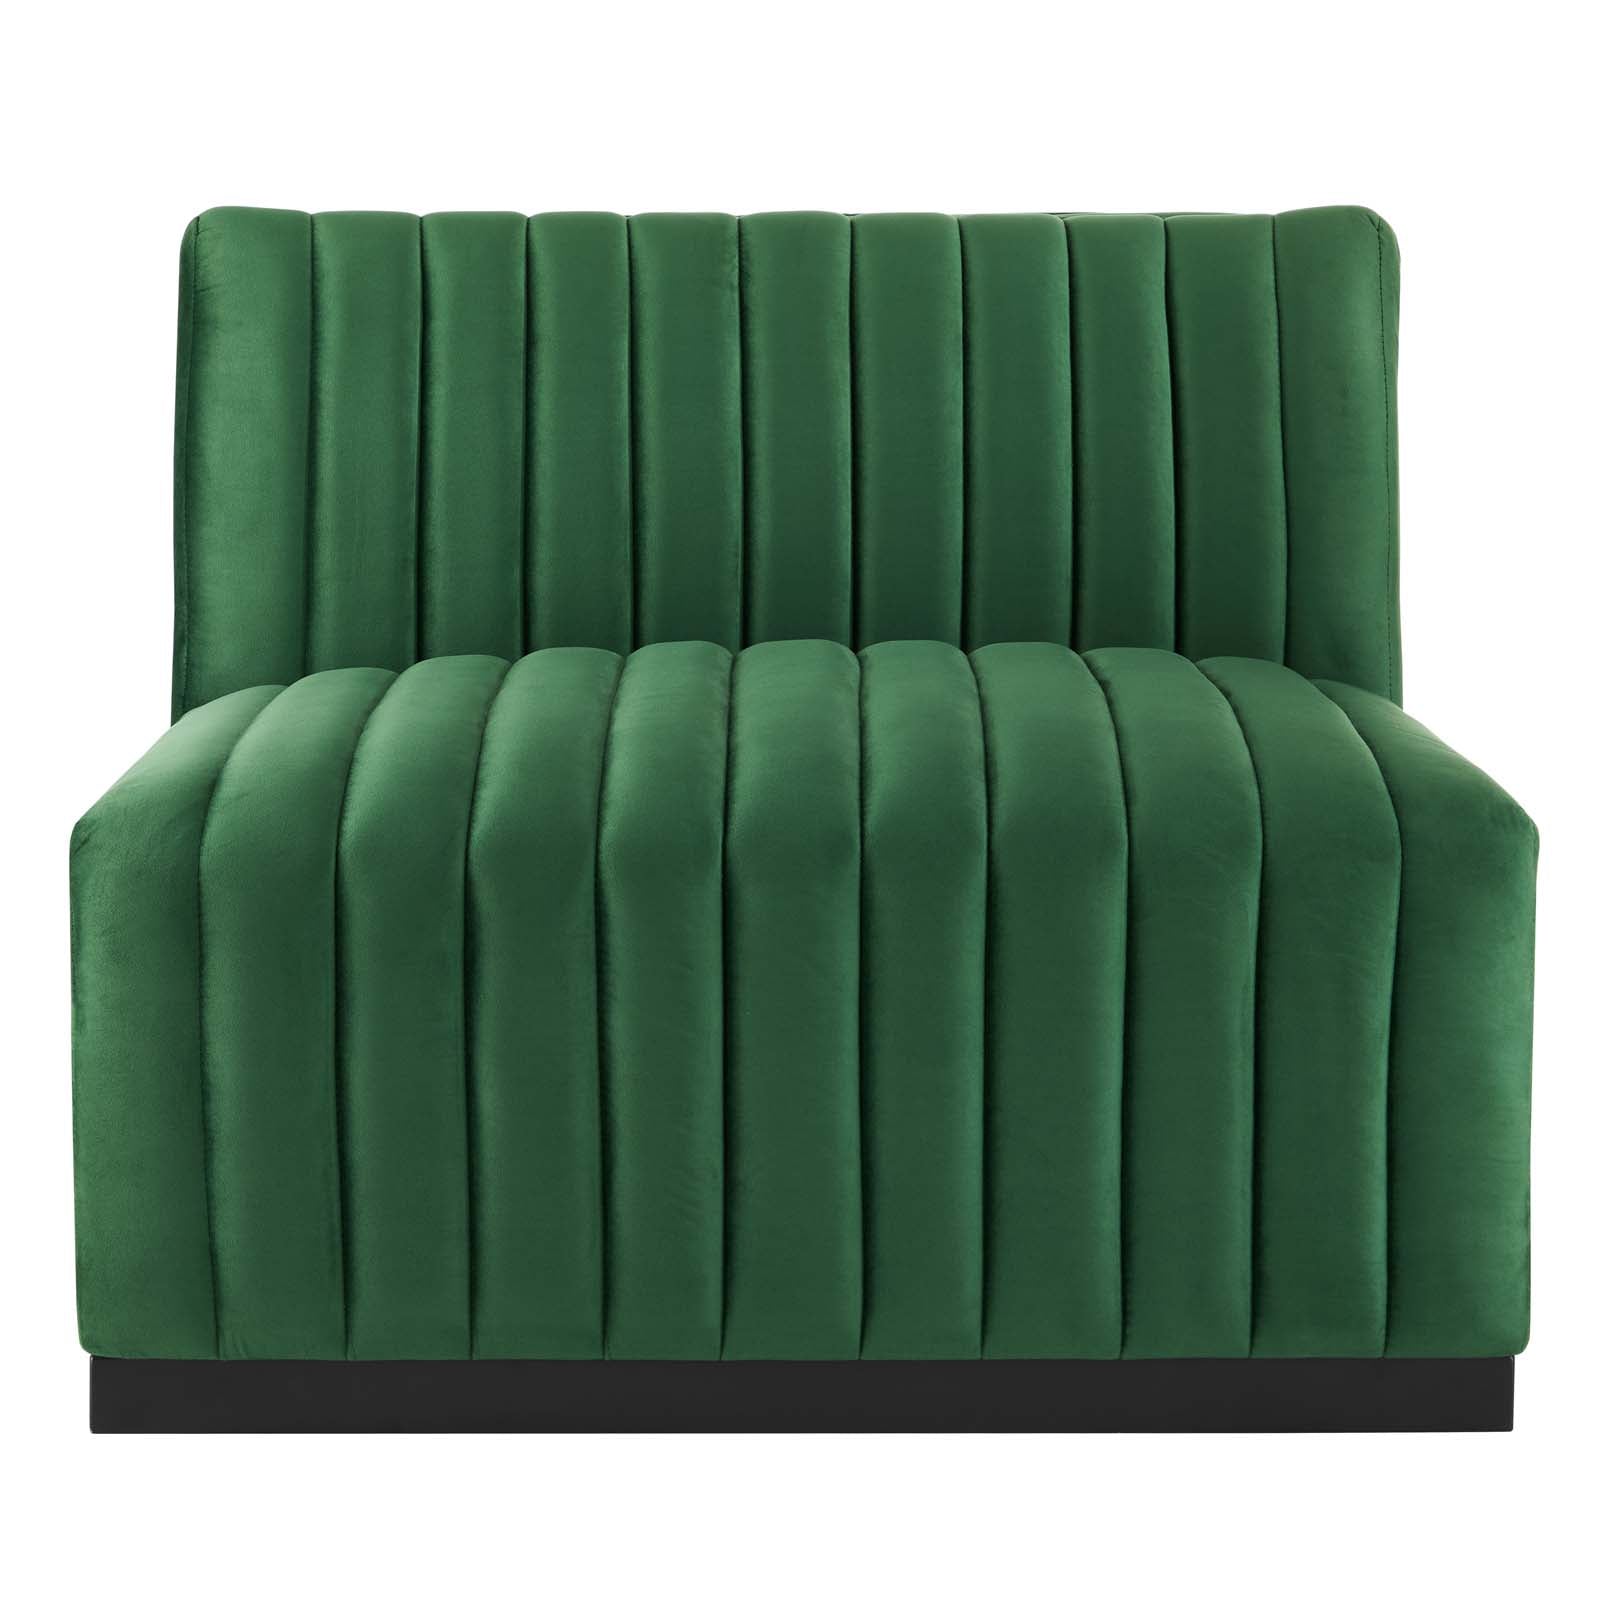 Modway Sectional Sofas - Conjure Channel Tufted Performance Velvet 5-Piece Sectional Black Emerald